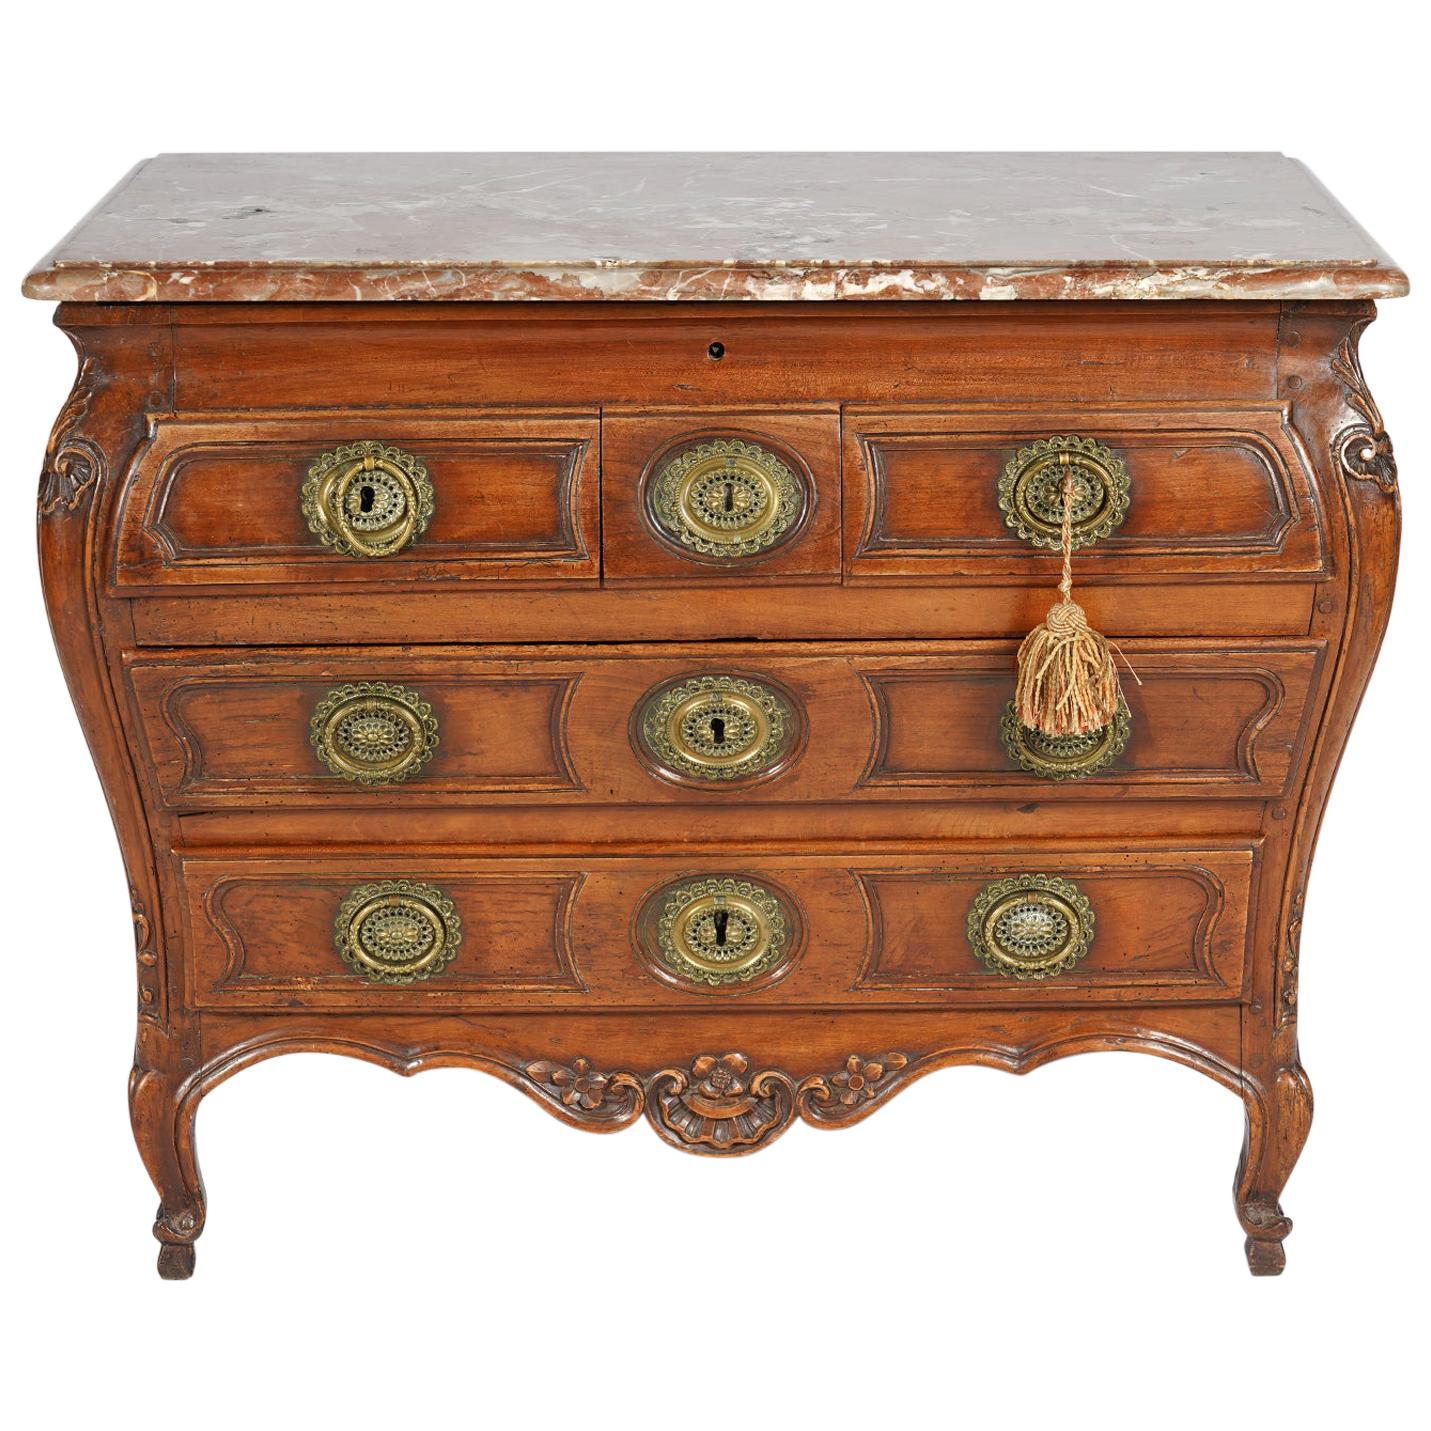 18th Century French Provincial Fruitwood Marble-Top Bombe Commode